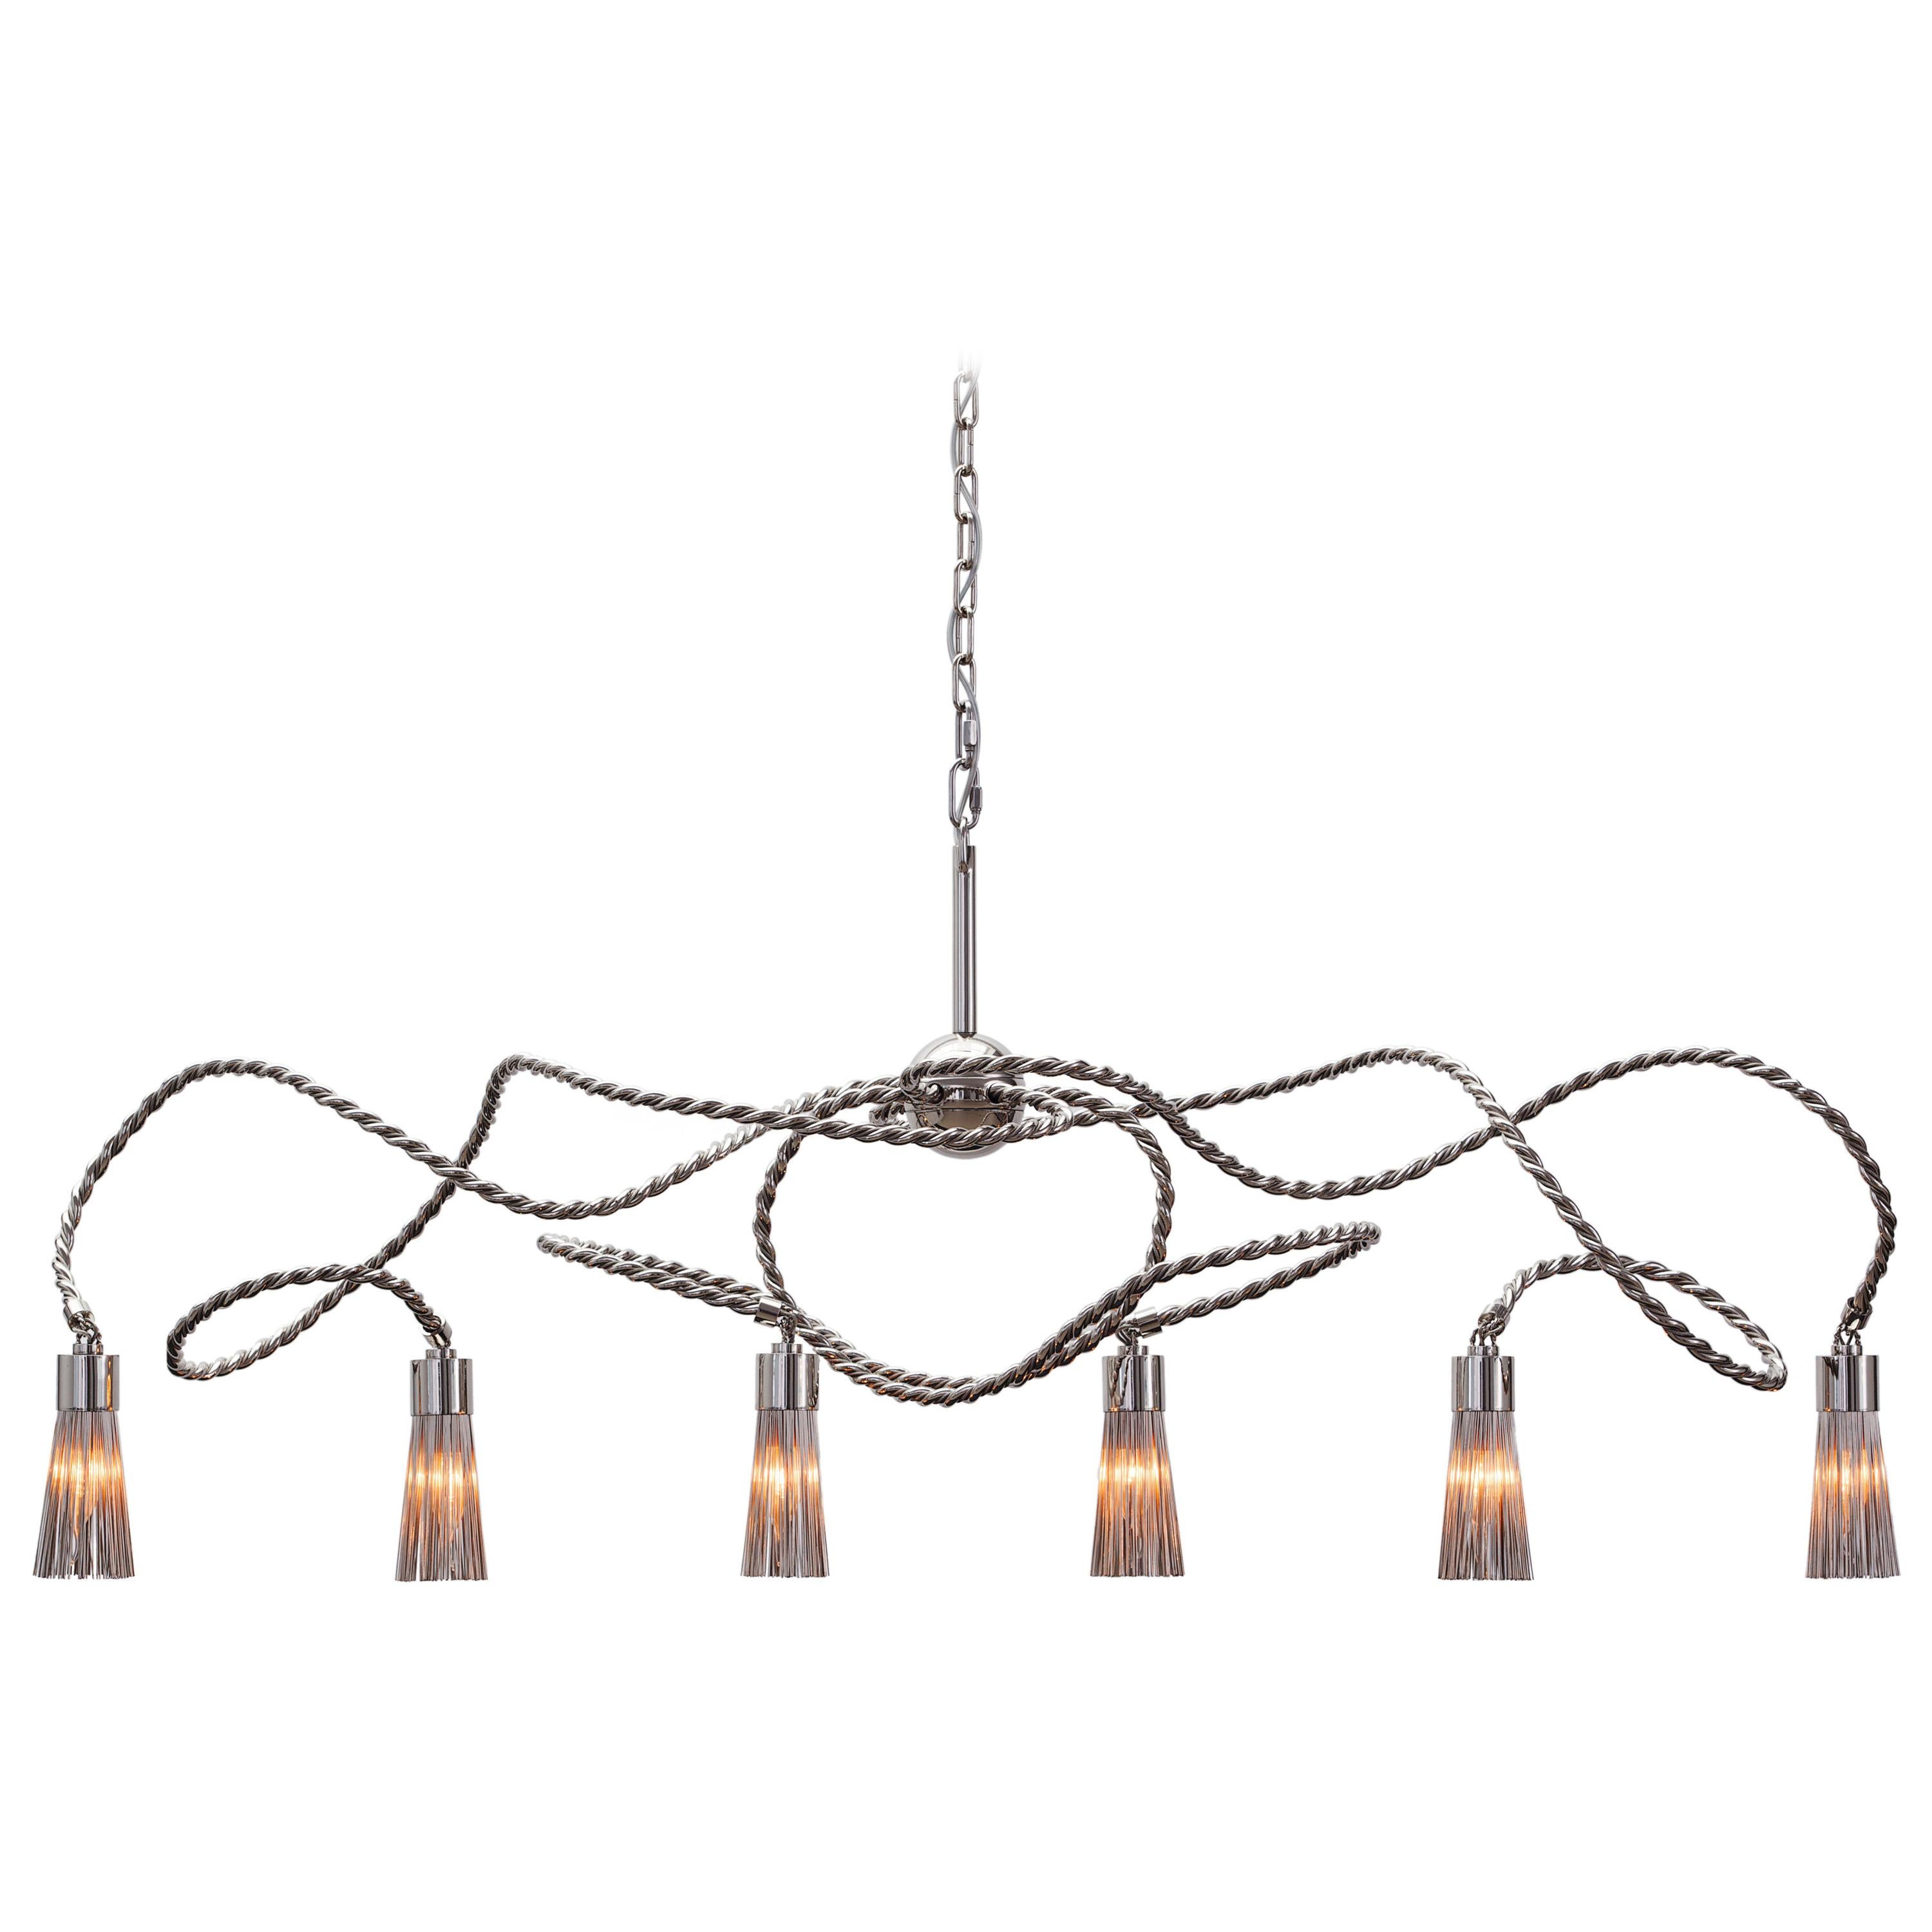 Modern Pendant in a Nickel Finish, Sultans of Swing Collection, by Brand Van For Sale